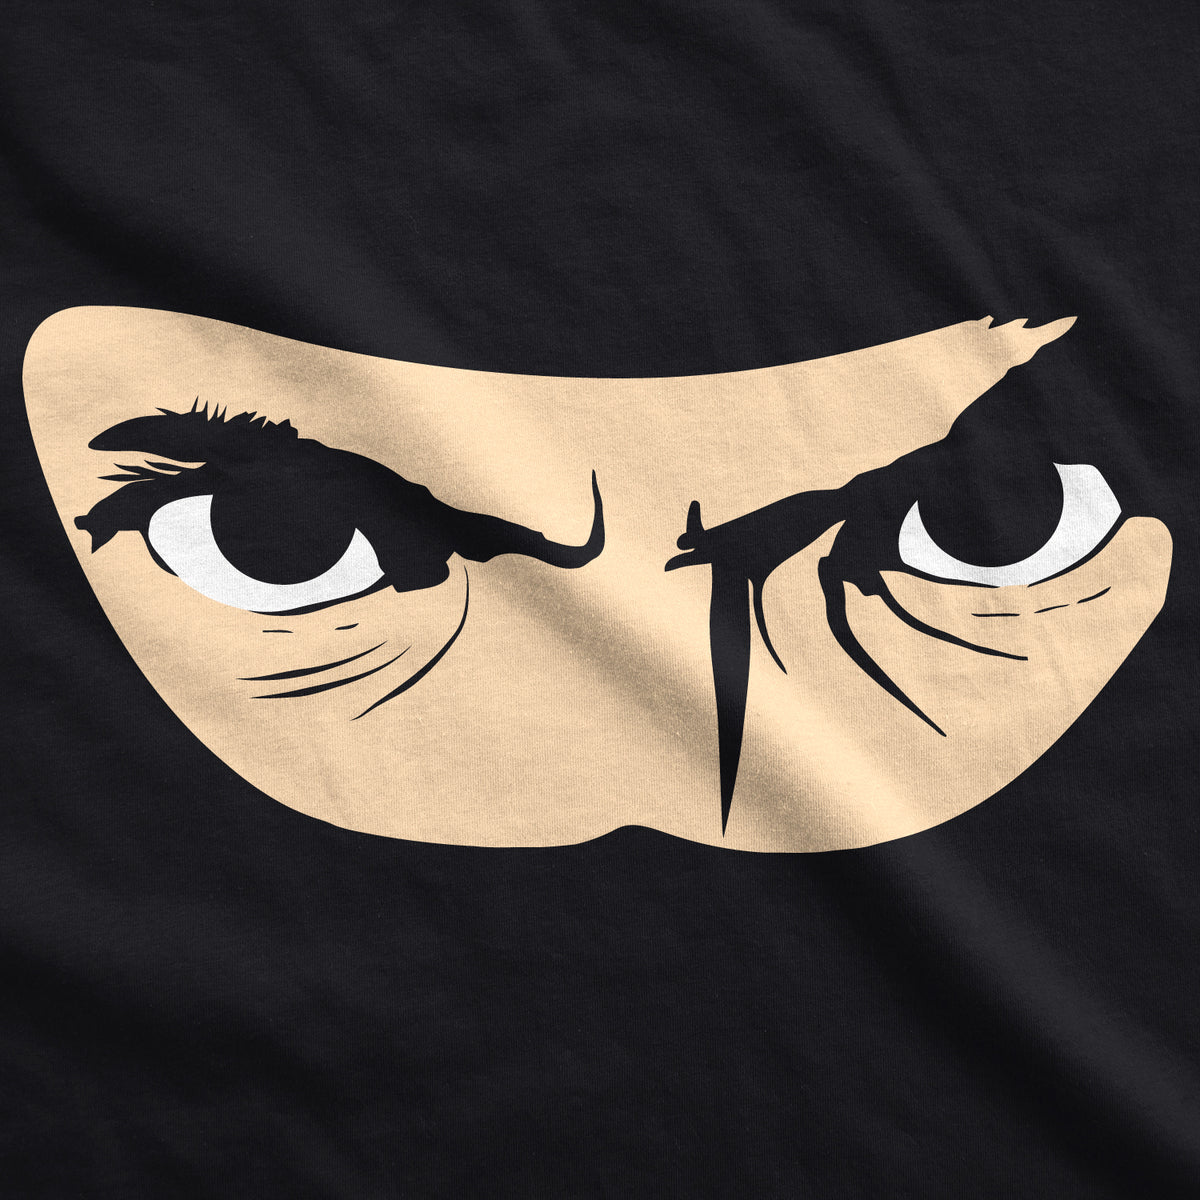 Ask Me About My Ninja Disguise Toddler T Shirt